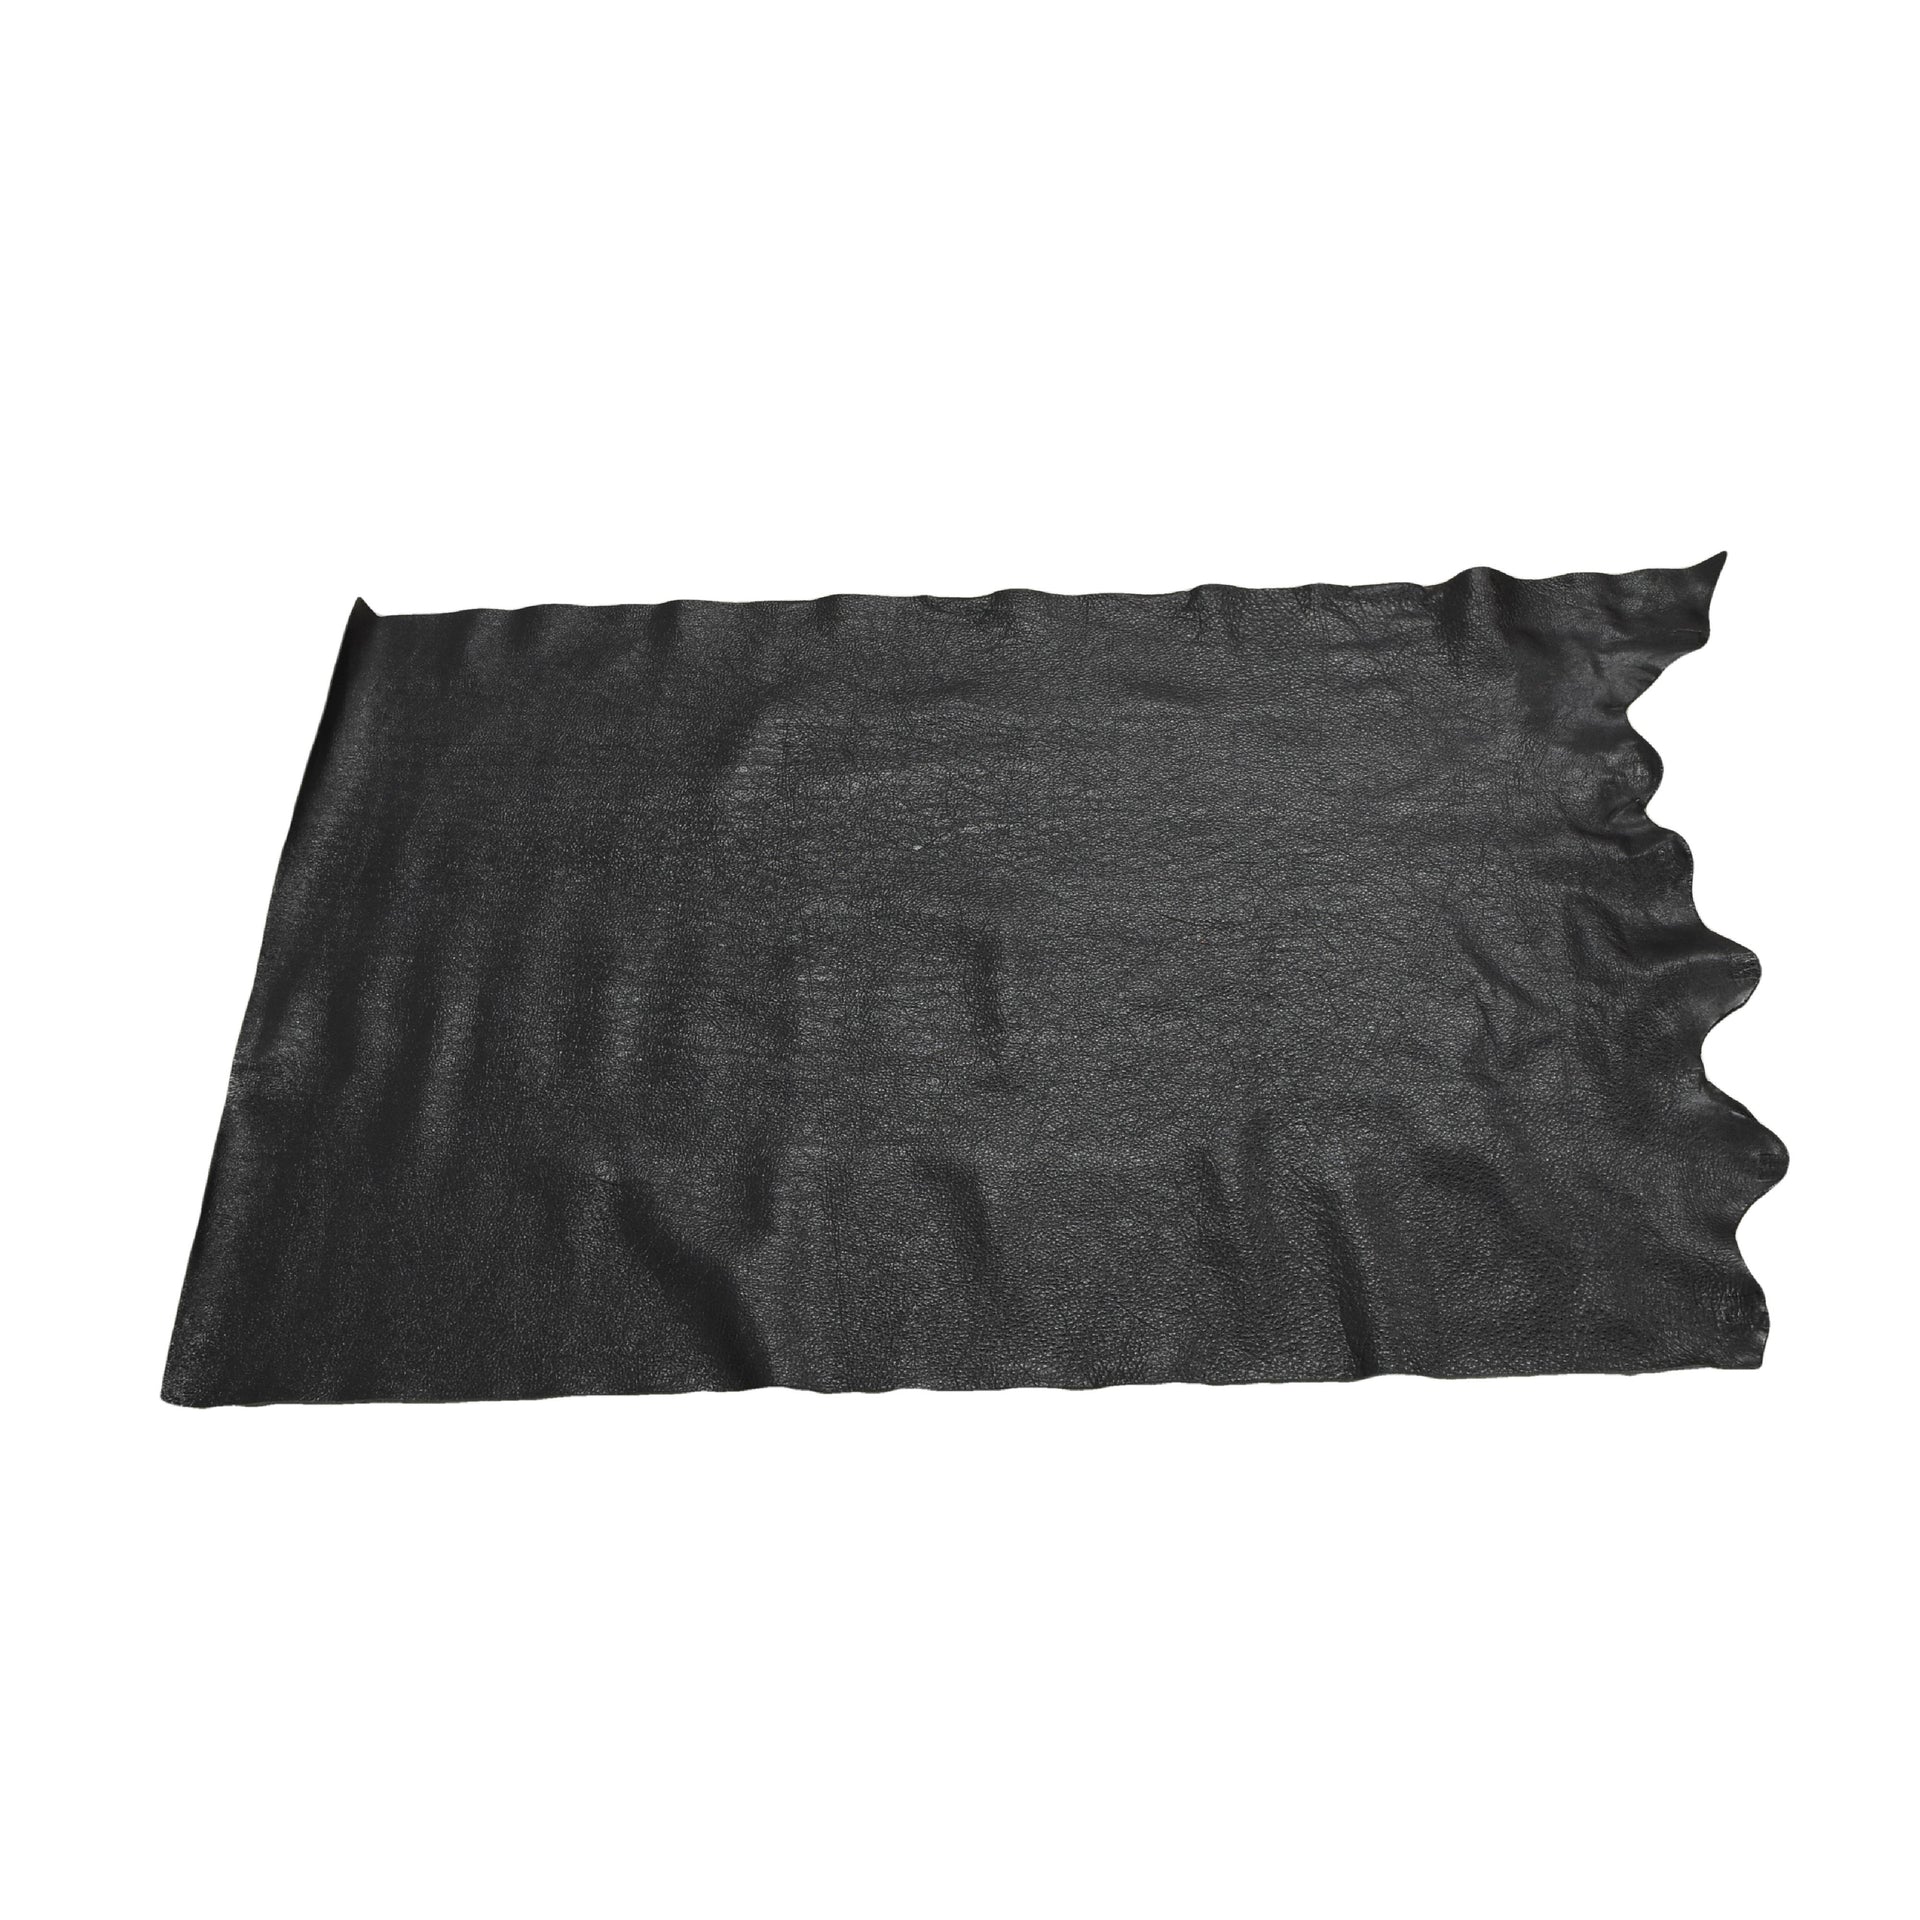 Blackjack Metallic Vegas 2-3 oz Leather Cow Hides, 6.5-7.5 Sq Ft / Project Piece (Middle) | The Leather Guy